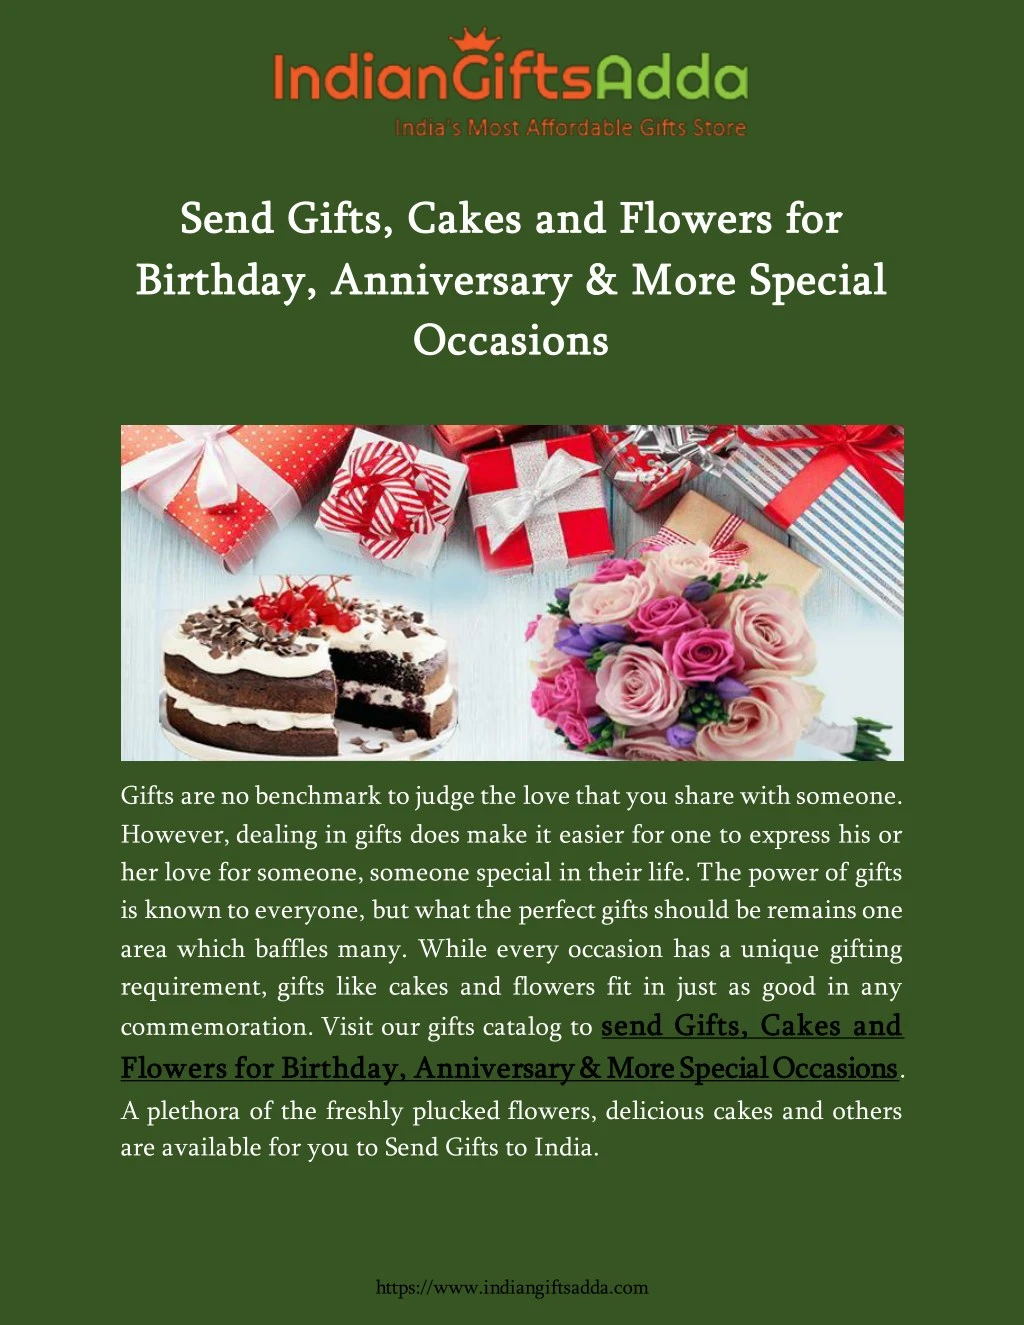 send gifts cakes and flowers for send gifts cakes